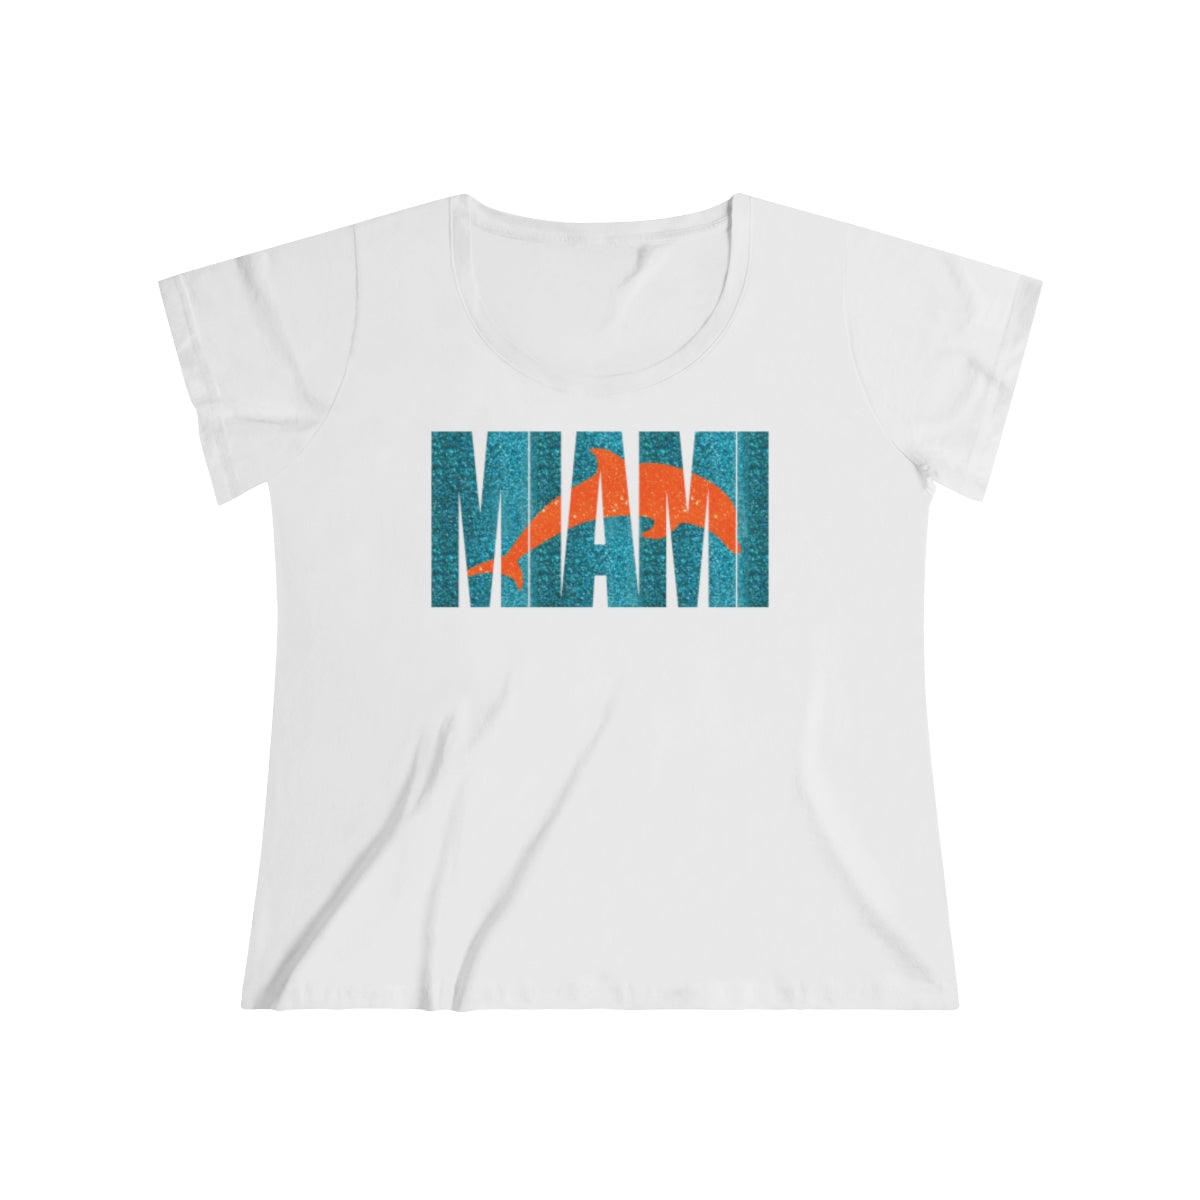 Miami Dolphins Inspired Ombre Glitter Text with Dolphin Glitter inset Women's Curvy Tee